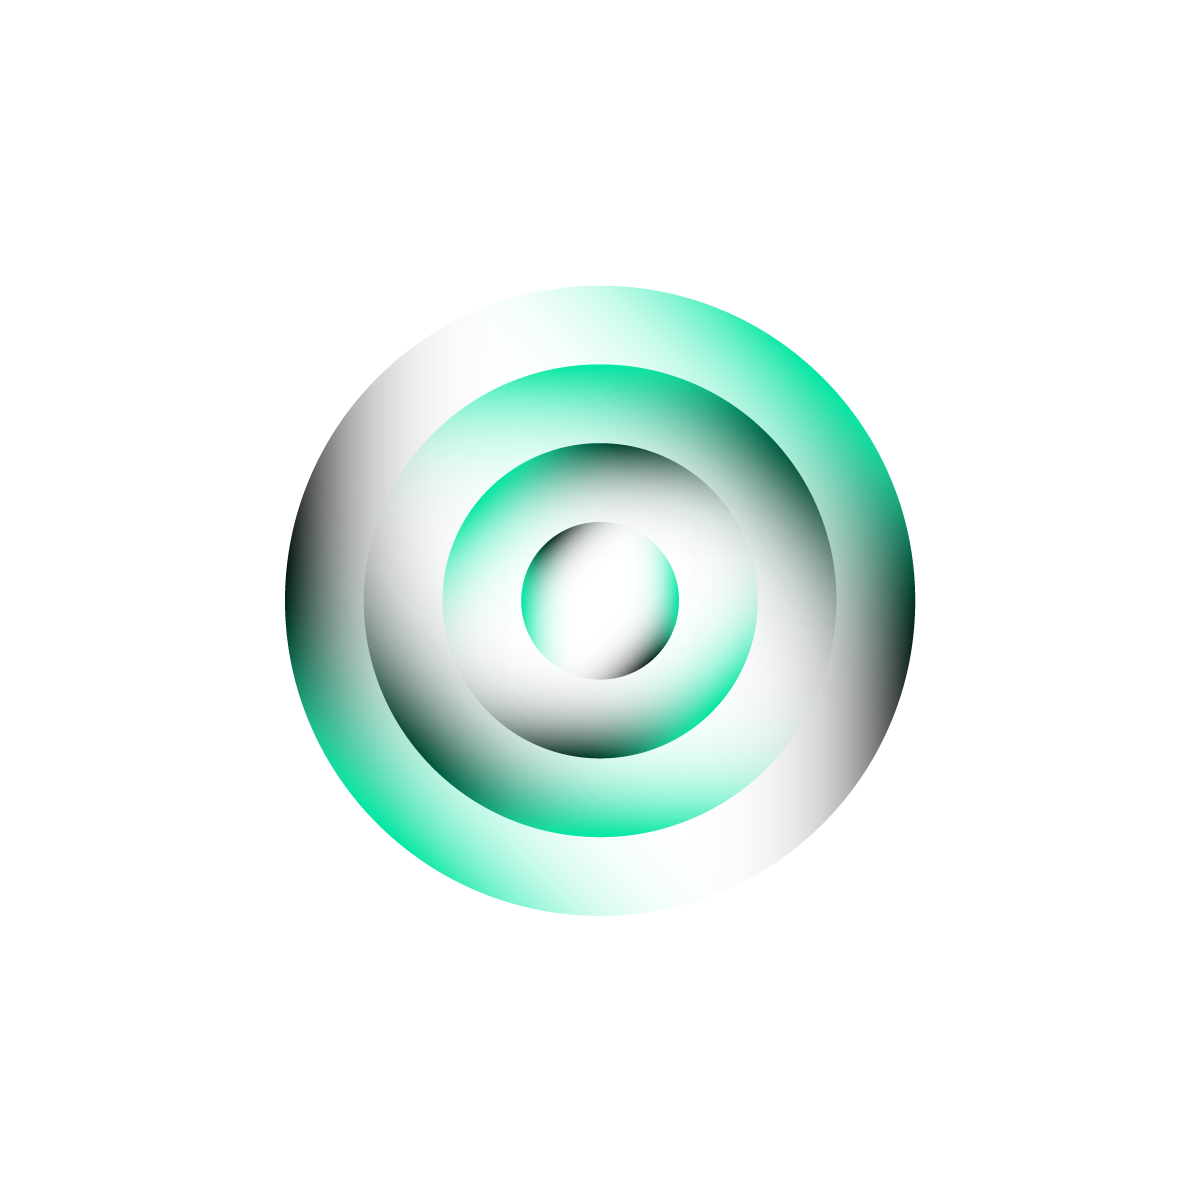 Radiology Logo: Four circles increasing in size, resembling radio waves or signals